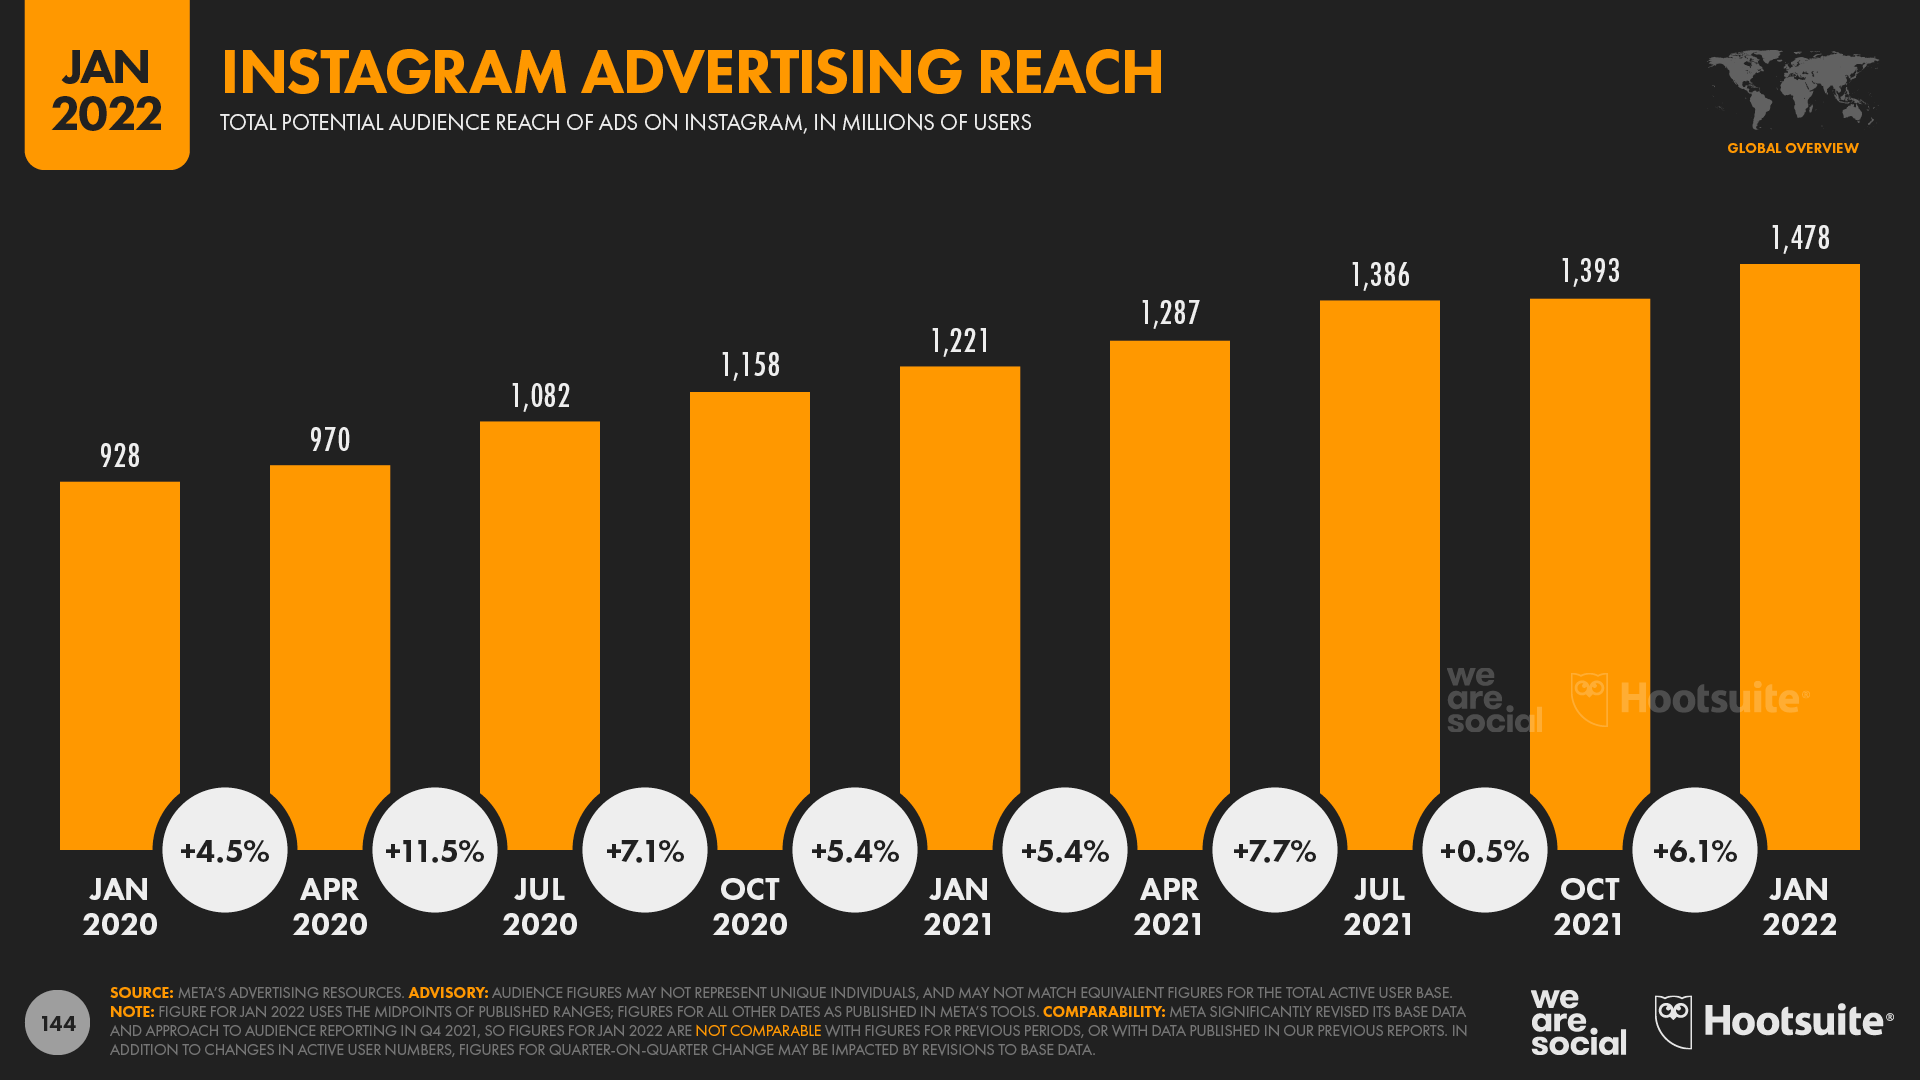 chart showing Instagram's advertising reach